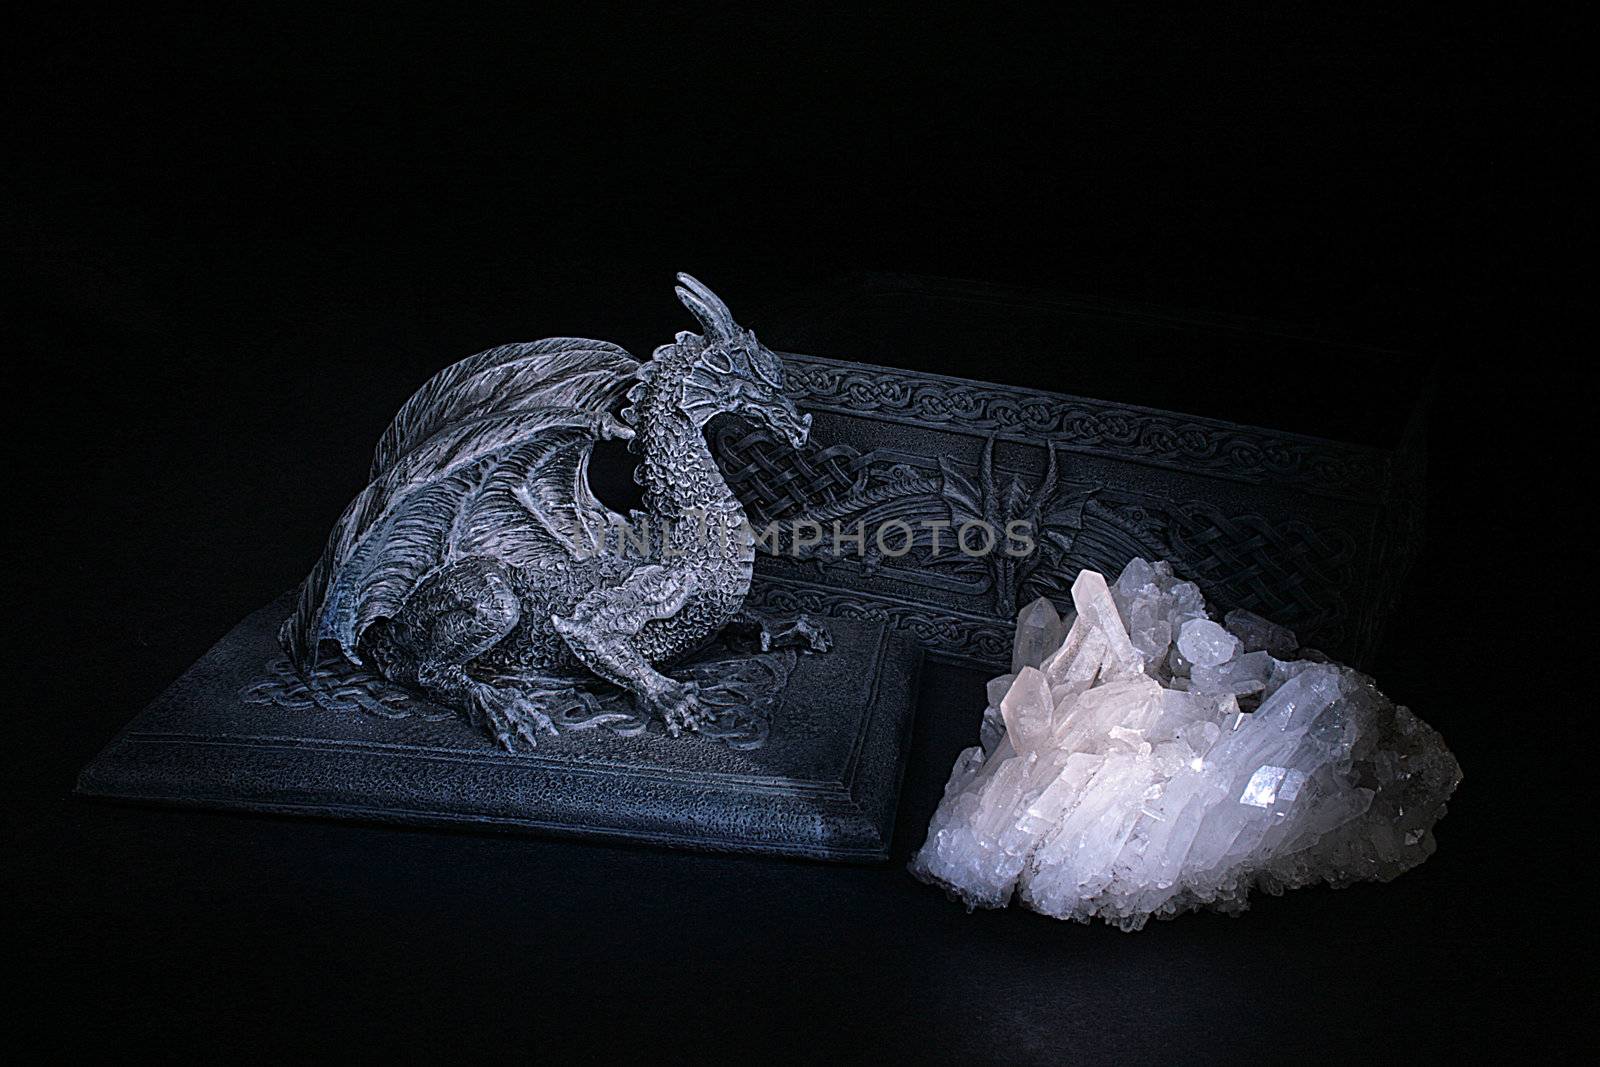 The casket on which cover lies a dragon and before a casket crystals for predictions lie.